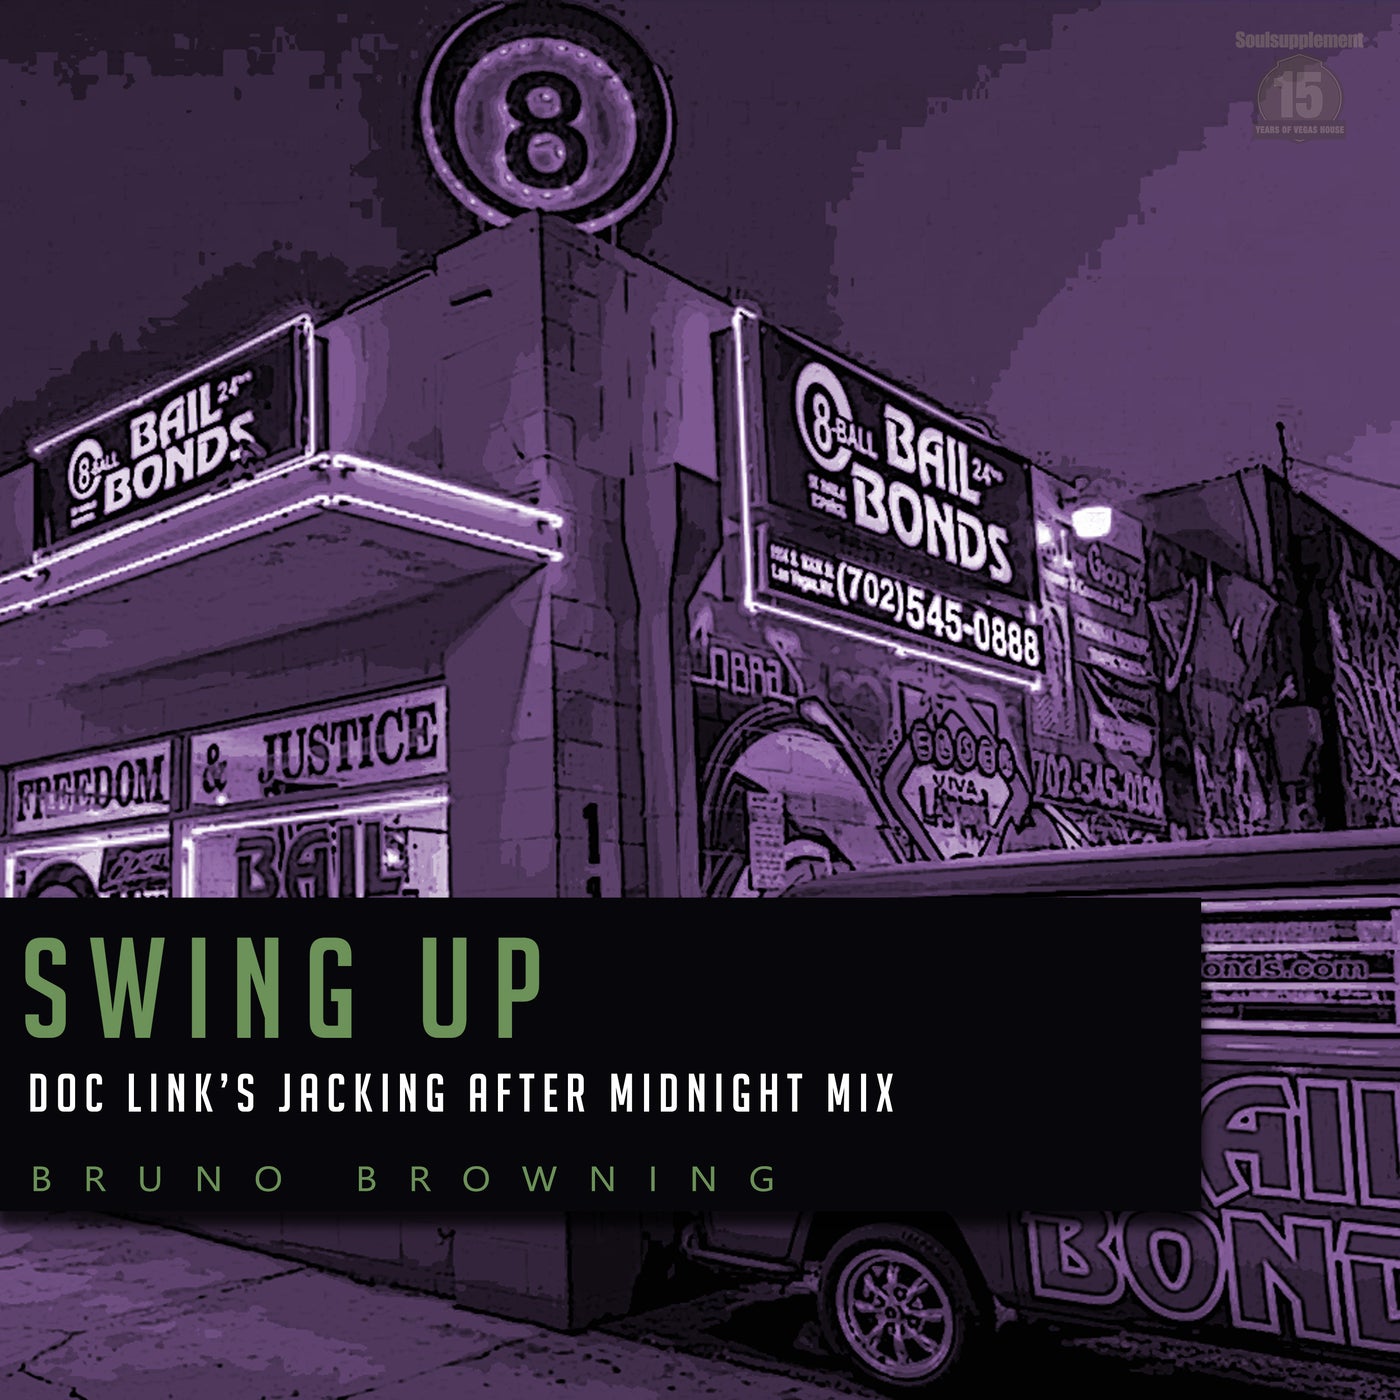 Swing Up (Doc Link's Jacking After Midnight Mix)